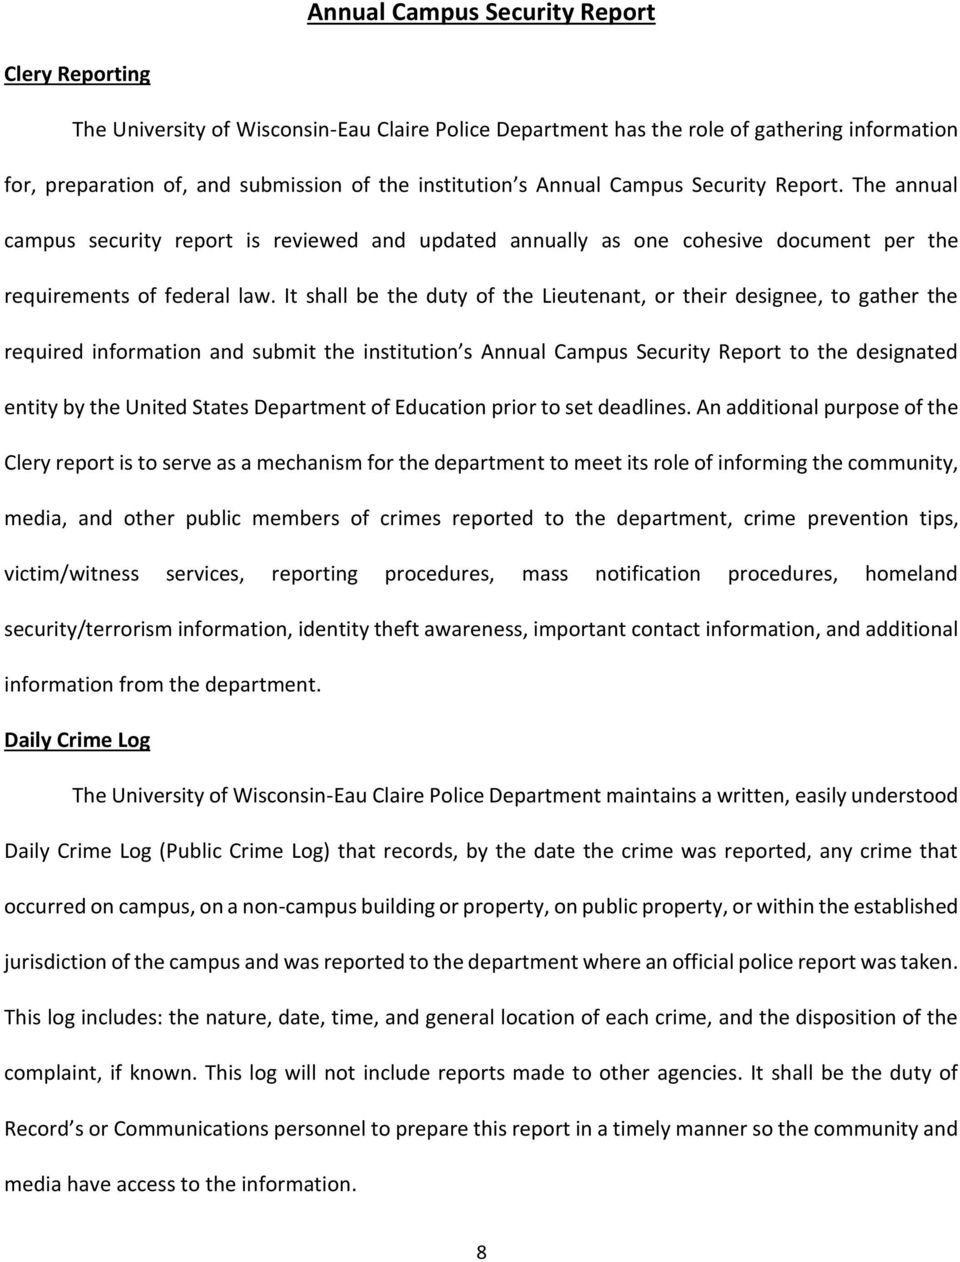 It shall be the duty of the Lieutenant, or their designee, to gather the required information and submit the institution s Annual Campus Security Report to the designated entity by the United States